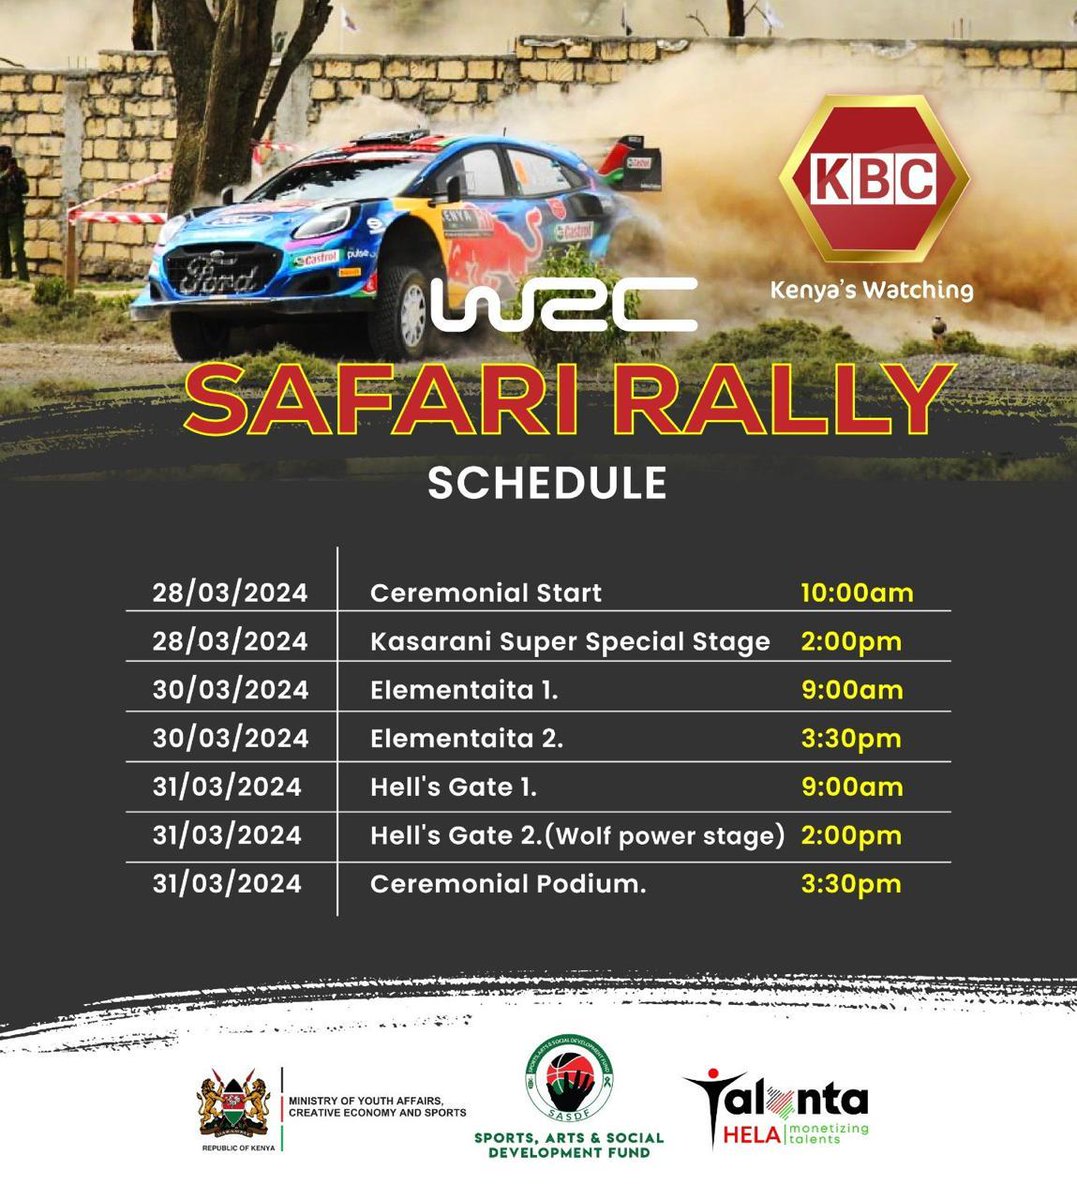 As drivers push themselves to the limit, spectators hold their breath, knowing that every corner could spell triumph or disaster. 
#EasterNaSafariRally  Easter Na Rally
@SpokespersonGoK @MwauraIsaac1 @AbabuNamwamba @moyasa_ke